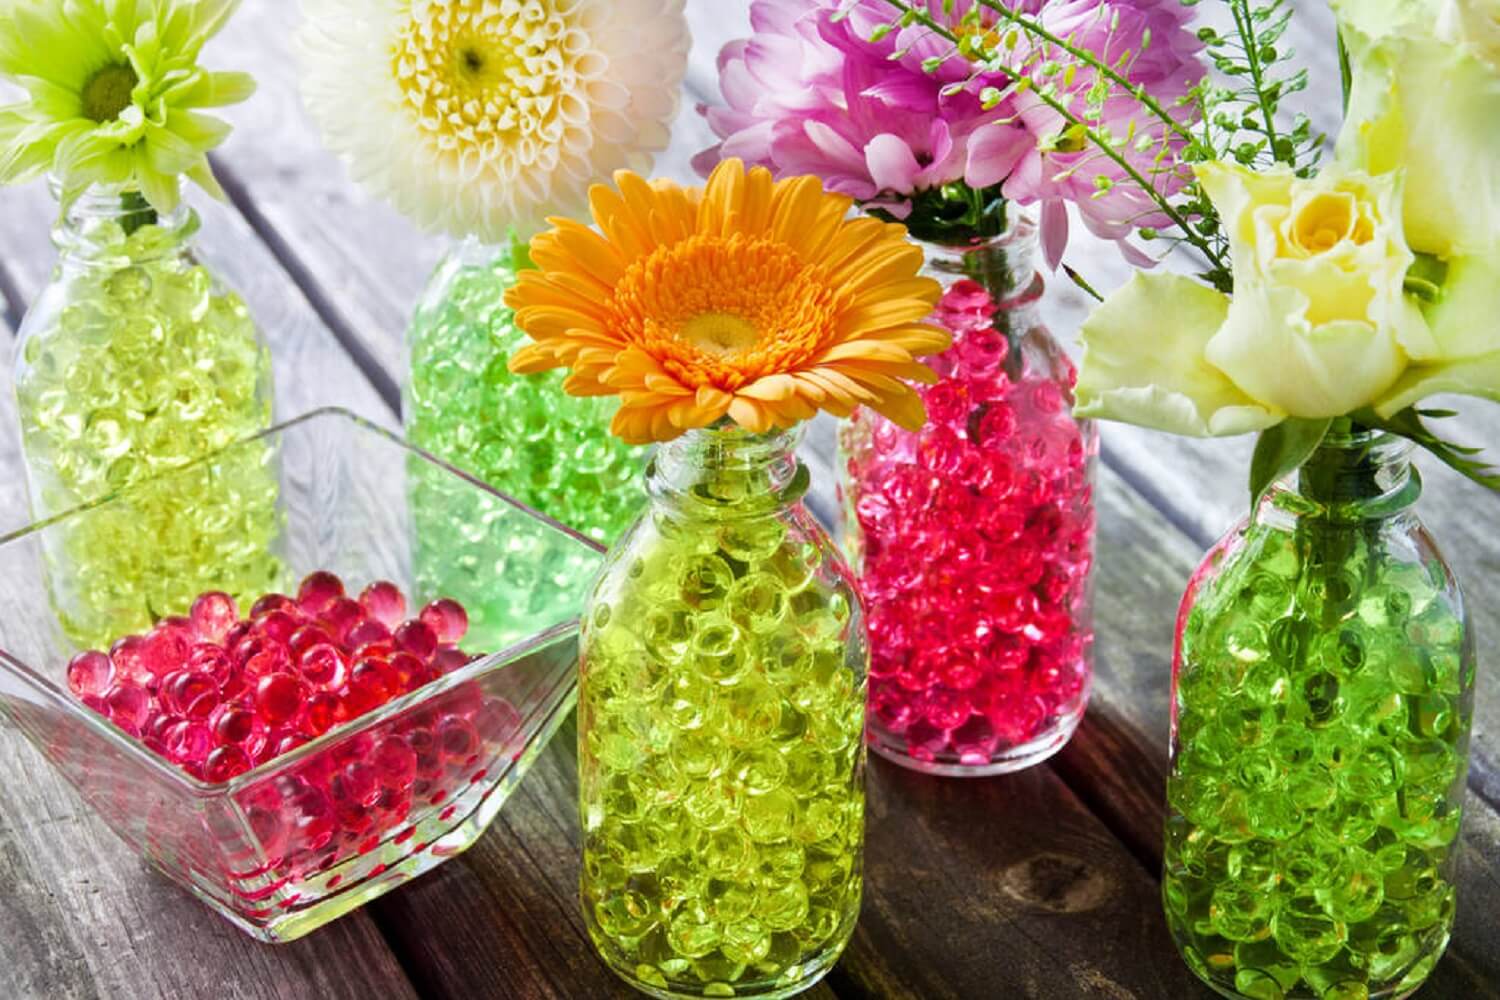 How To Hide Fake Flower Stems In Glass Vase